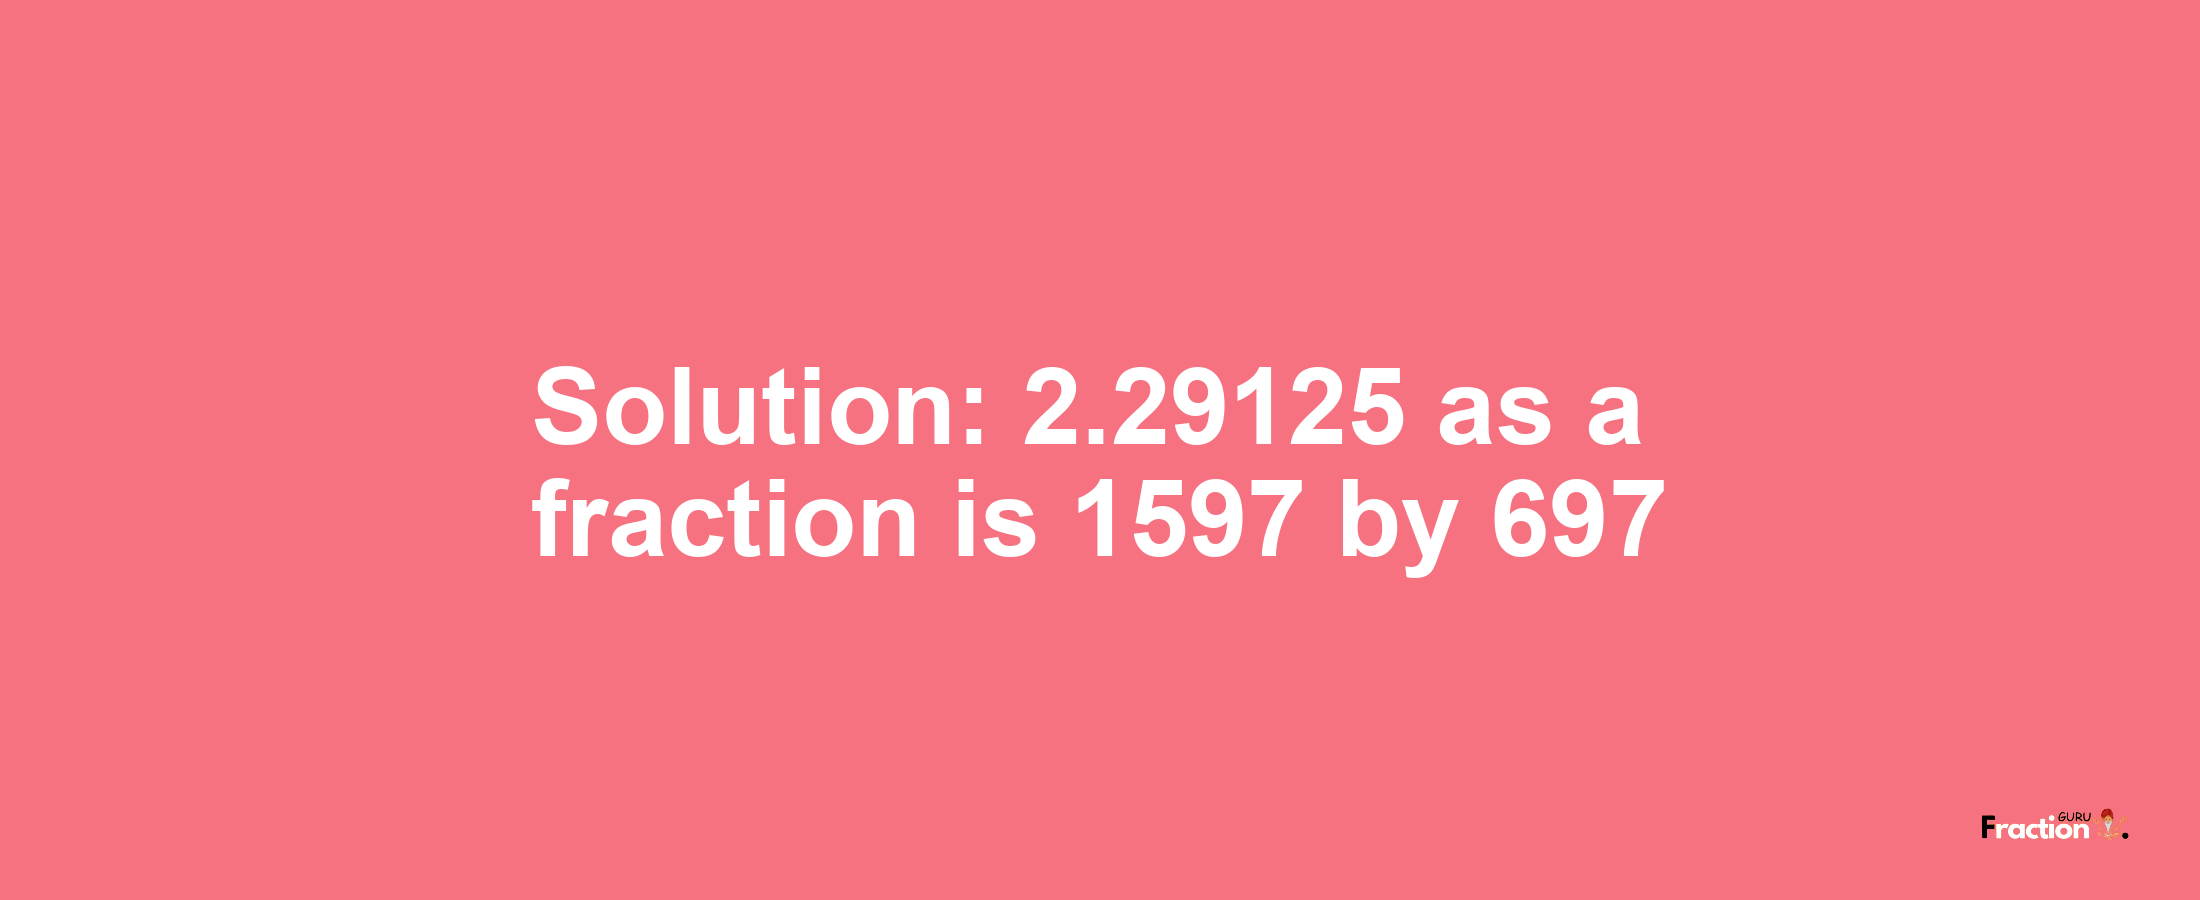 Solution:2.29125 as a fraction is 1597/697